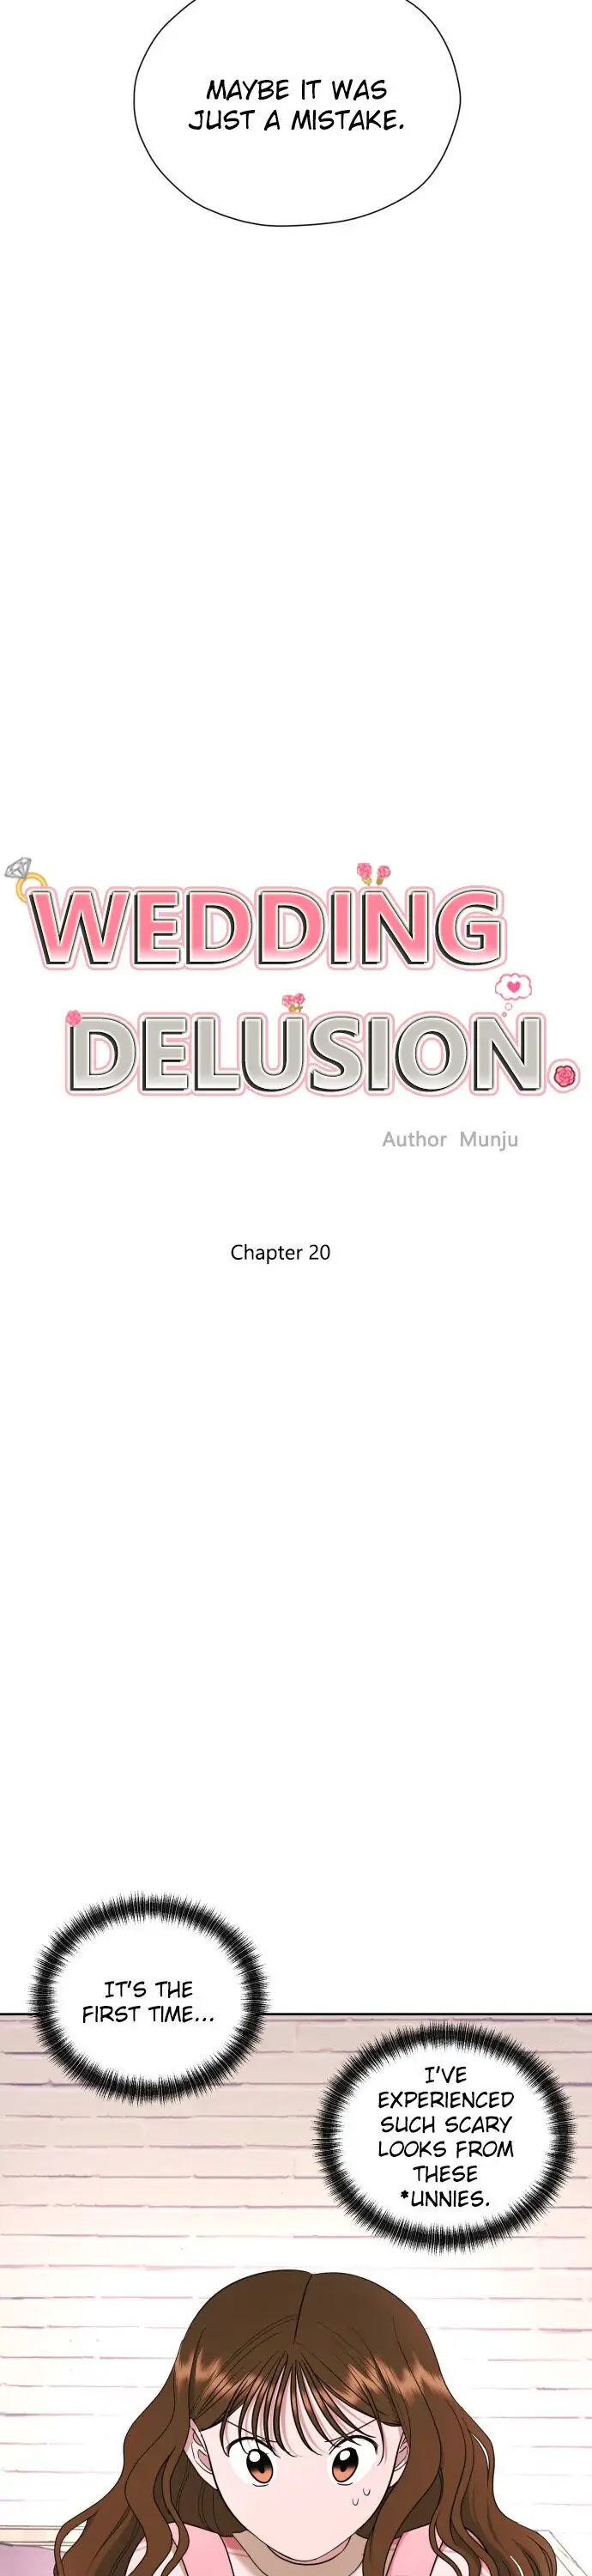 Wedding Delusion chapter 20